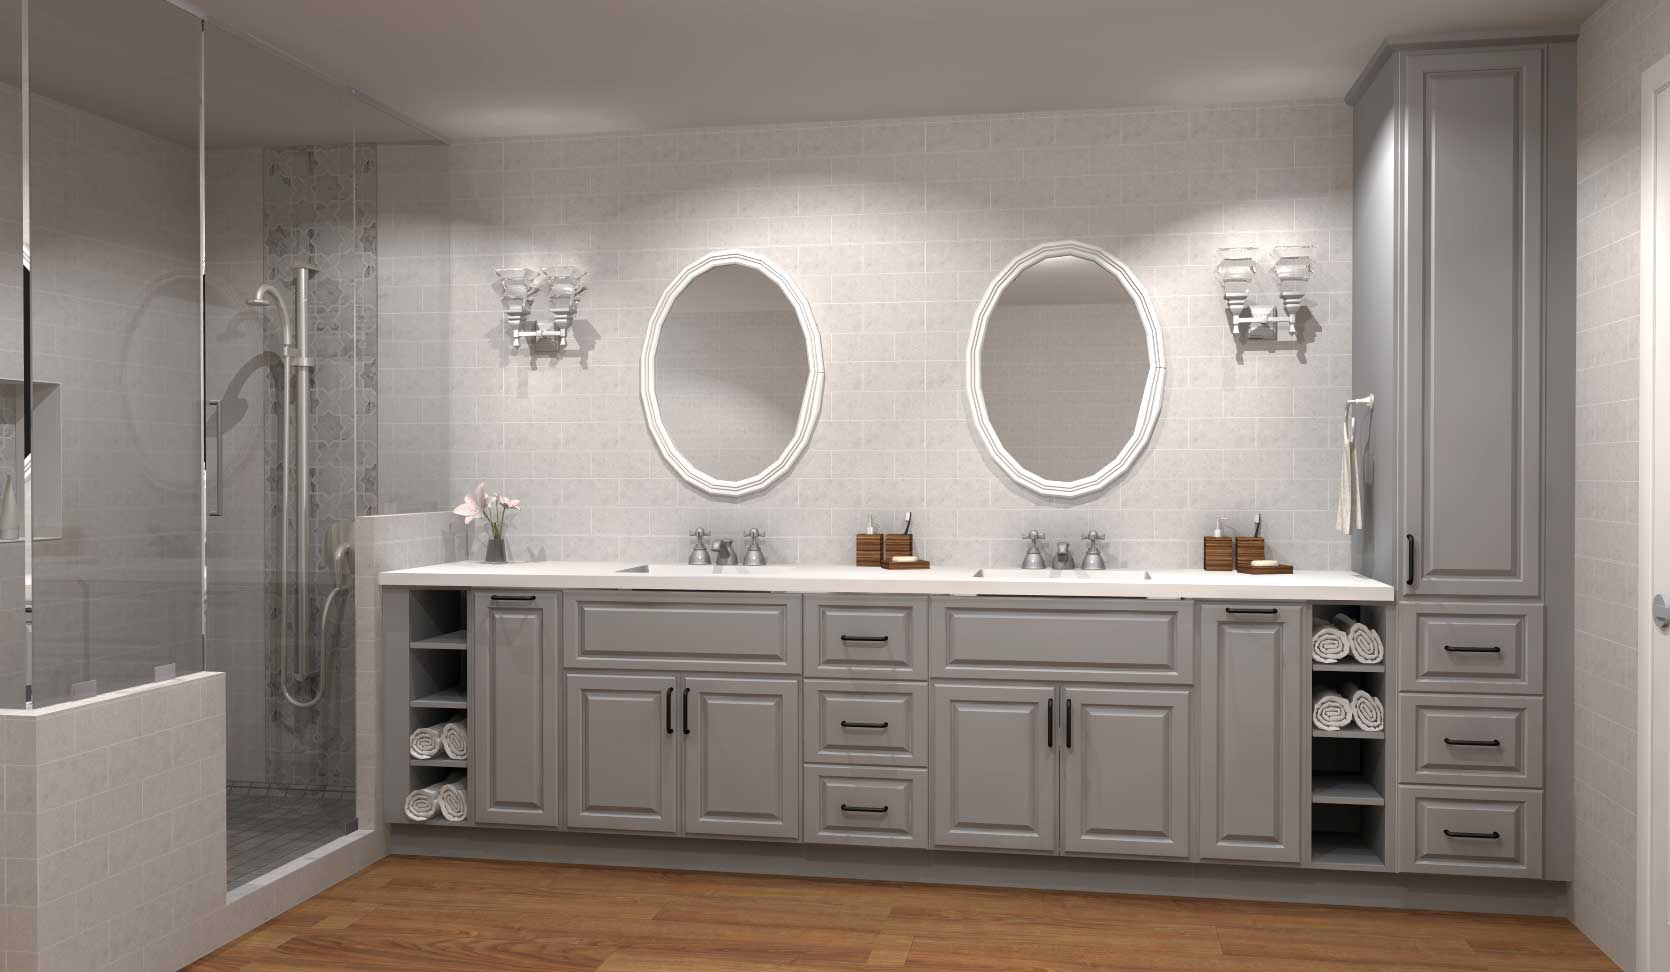 Designing Different Bathrooms with IKEA SEKTION Cabinetry